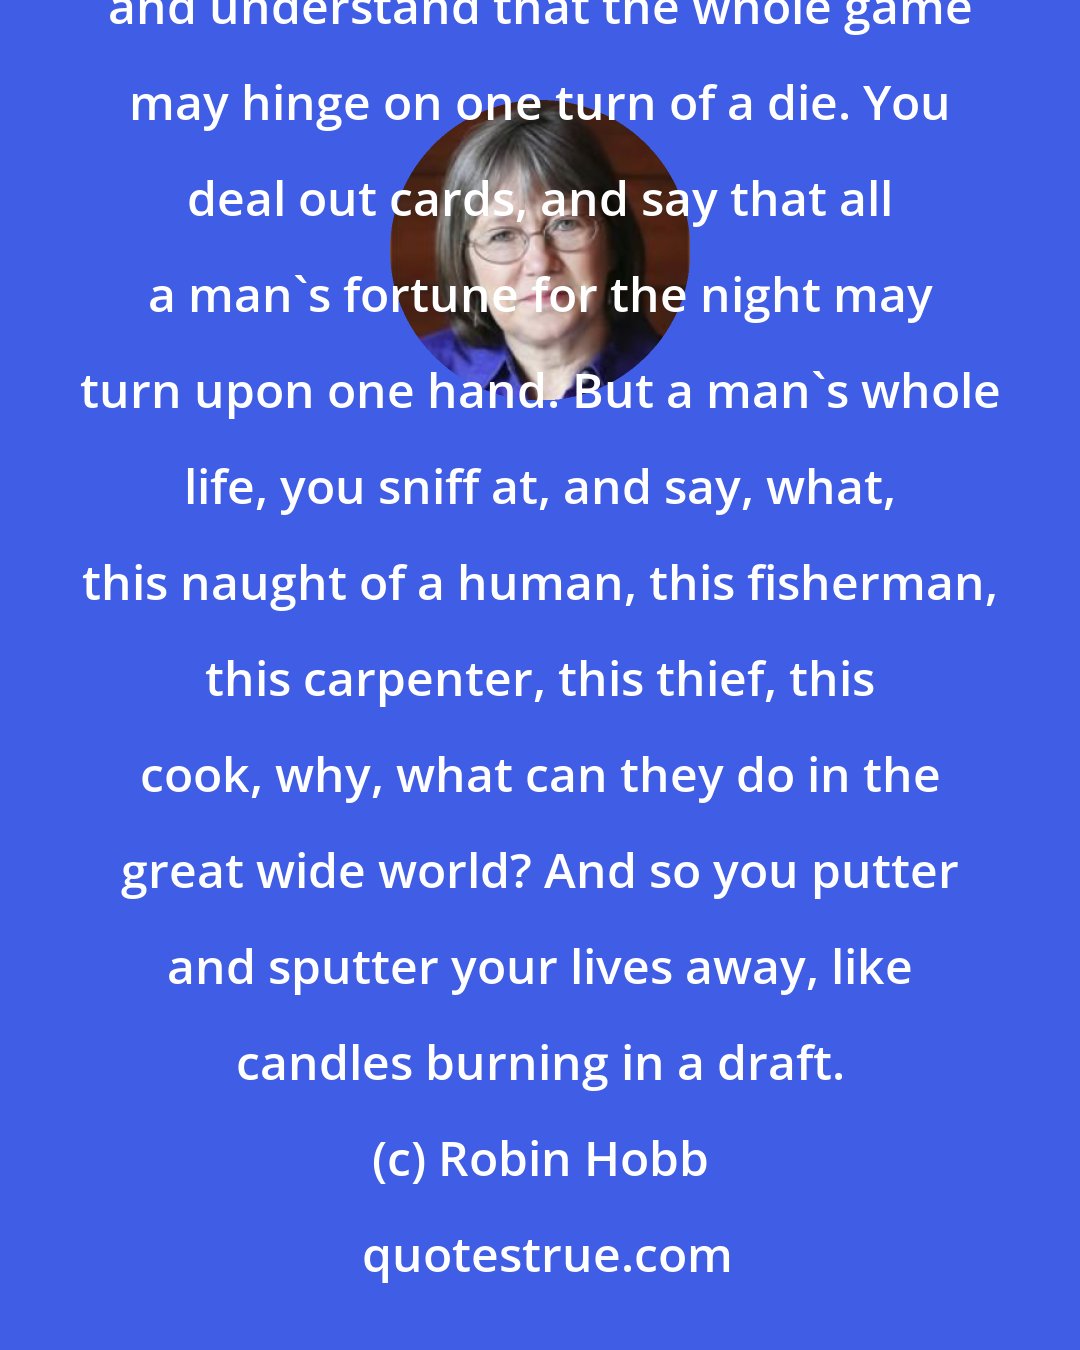 Robin Hobb: This, more than anything else, is what I have never understood about your people. You can roll dice, and understand that the whole game may hinge on one turn of a die. You deal out cards, and say that all a man's fortune for the night may turn upon one hand. But a man's whole life, you sniff at, and say, what, this naught of a human, this fisherman, this carpenter, this thief, this cook, why, what can they do in the great wide world? And so you putter and sputter your lives away, like candles burning in a draft.